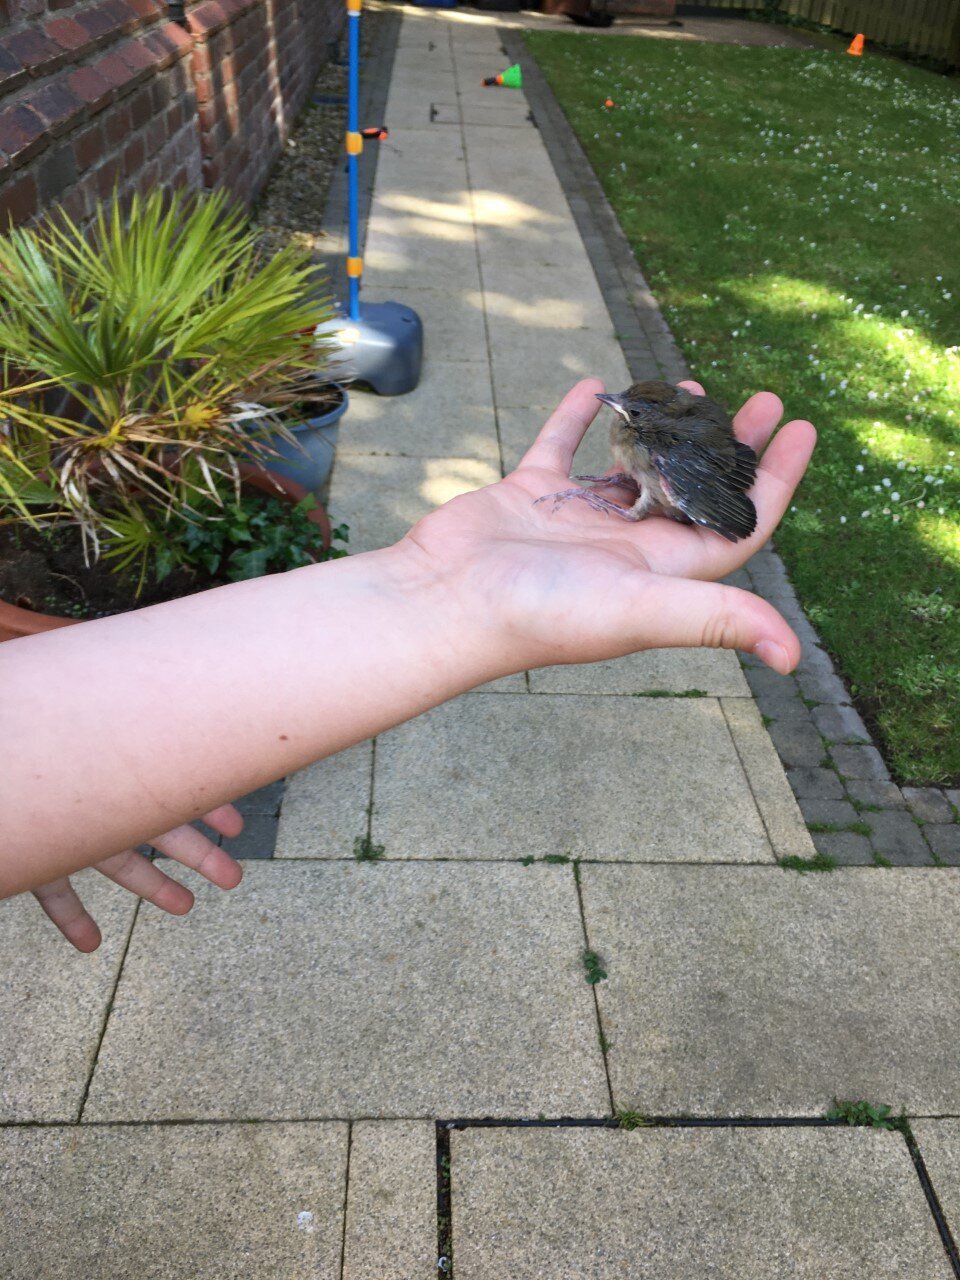 Thanks Darby for helping to save this fledgling